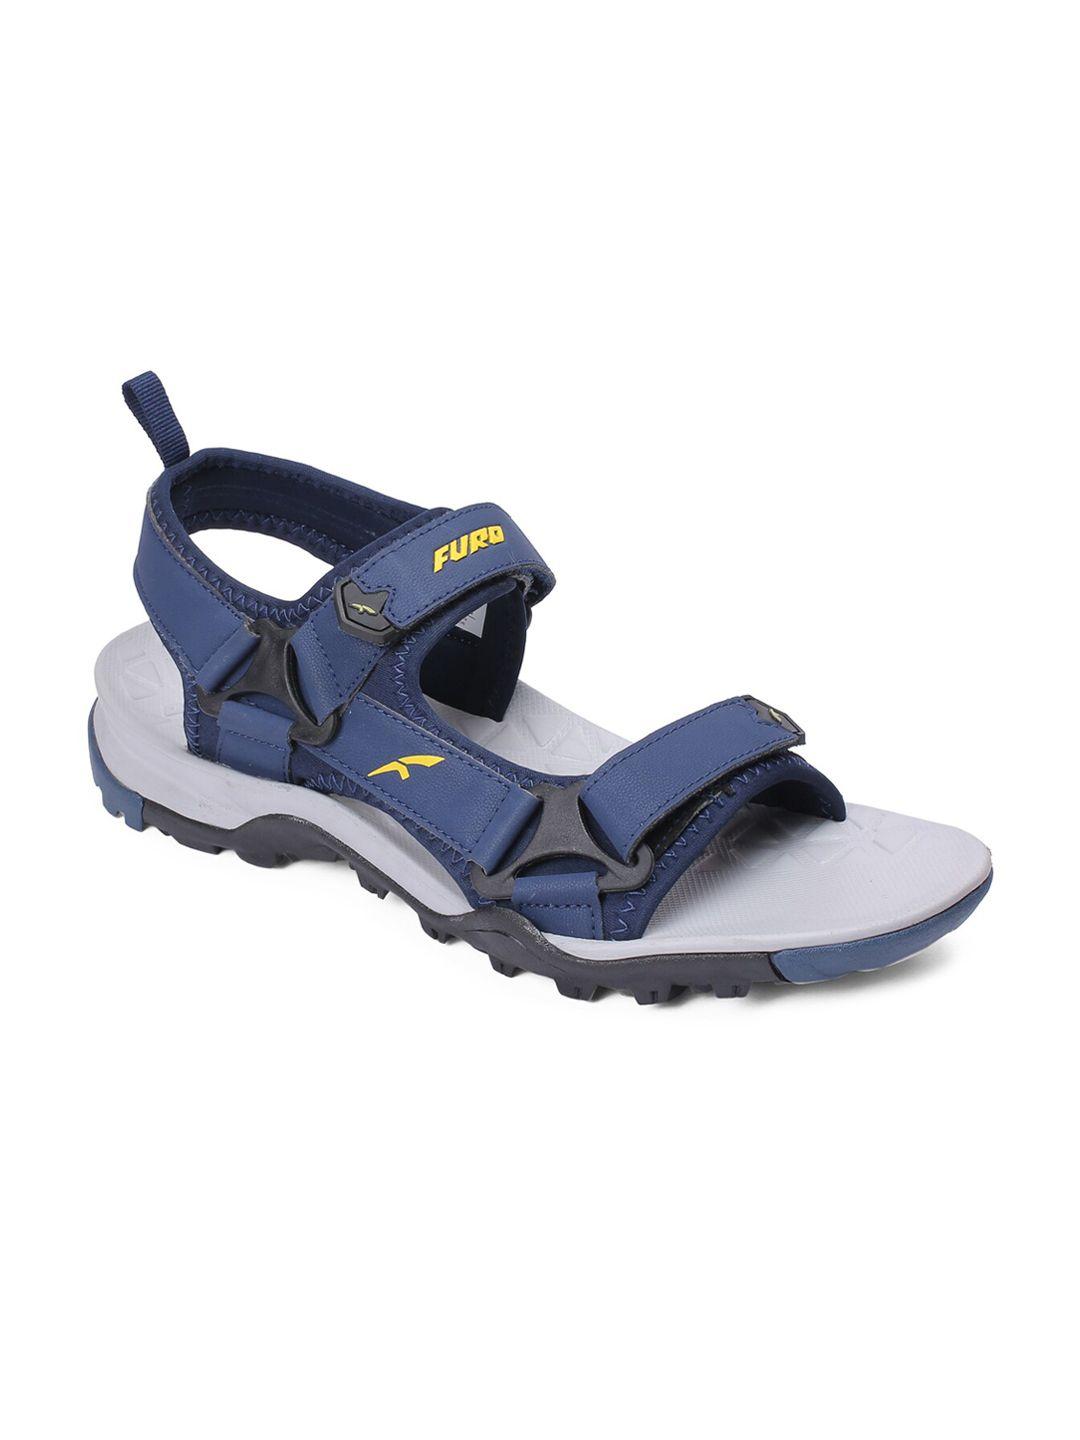 furo by red chief men blue & yellow patterned sports sandals